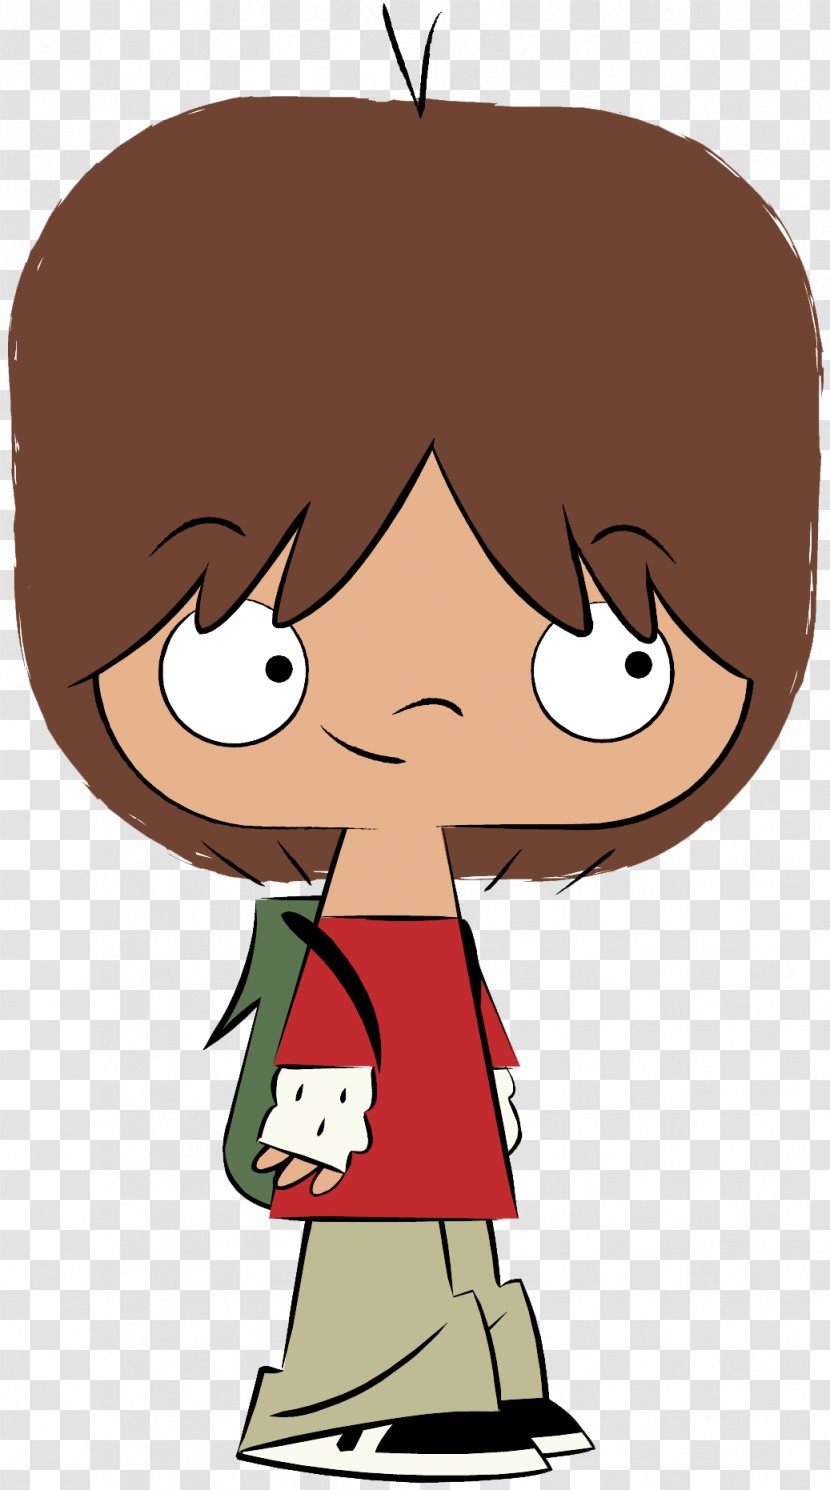 Friends Cartoon - Cheek - Style Pleased Transparent PNG